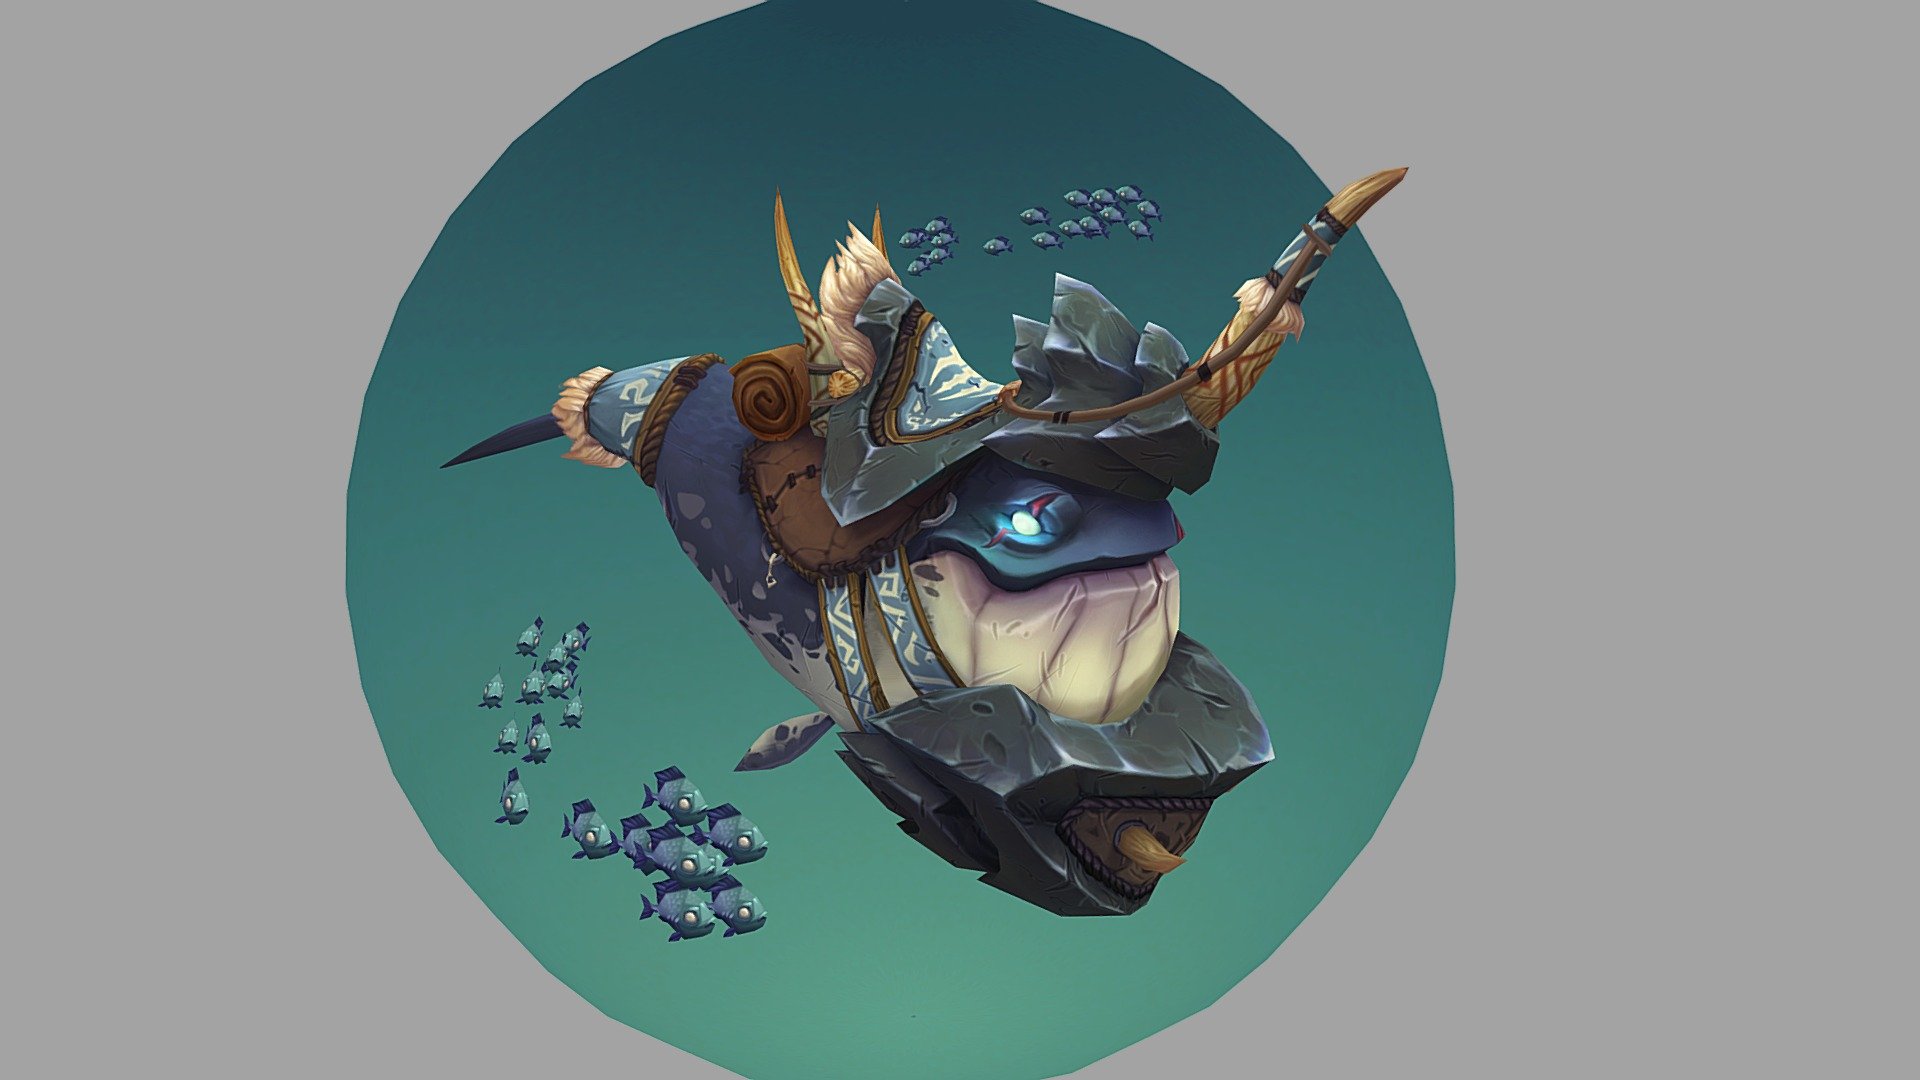 My submission for the Blizzard student character art contest! An aquatic mount for World of Warcraft.

5,056 tris
1024 x 1024 texture

Process and high poly: https://www.artstation.com/artwork/1nbvG2 - Warwhal - 3D model by tiffachiu (@tikachiu) 3d model